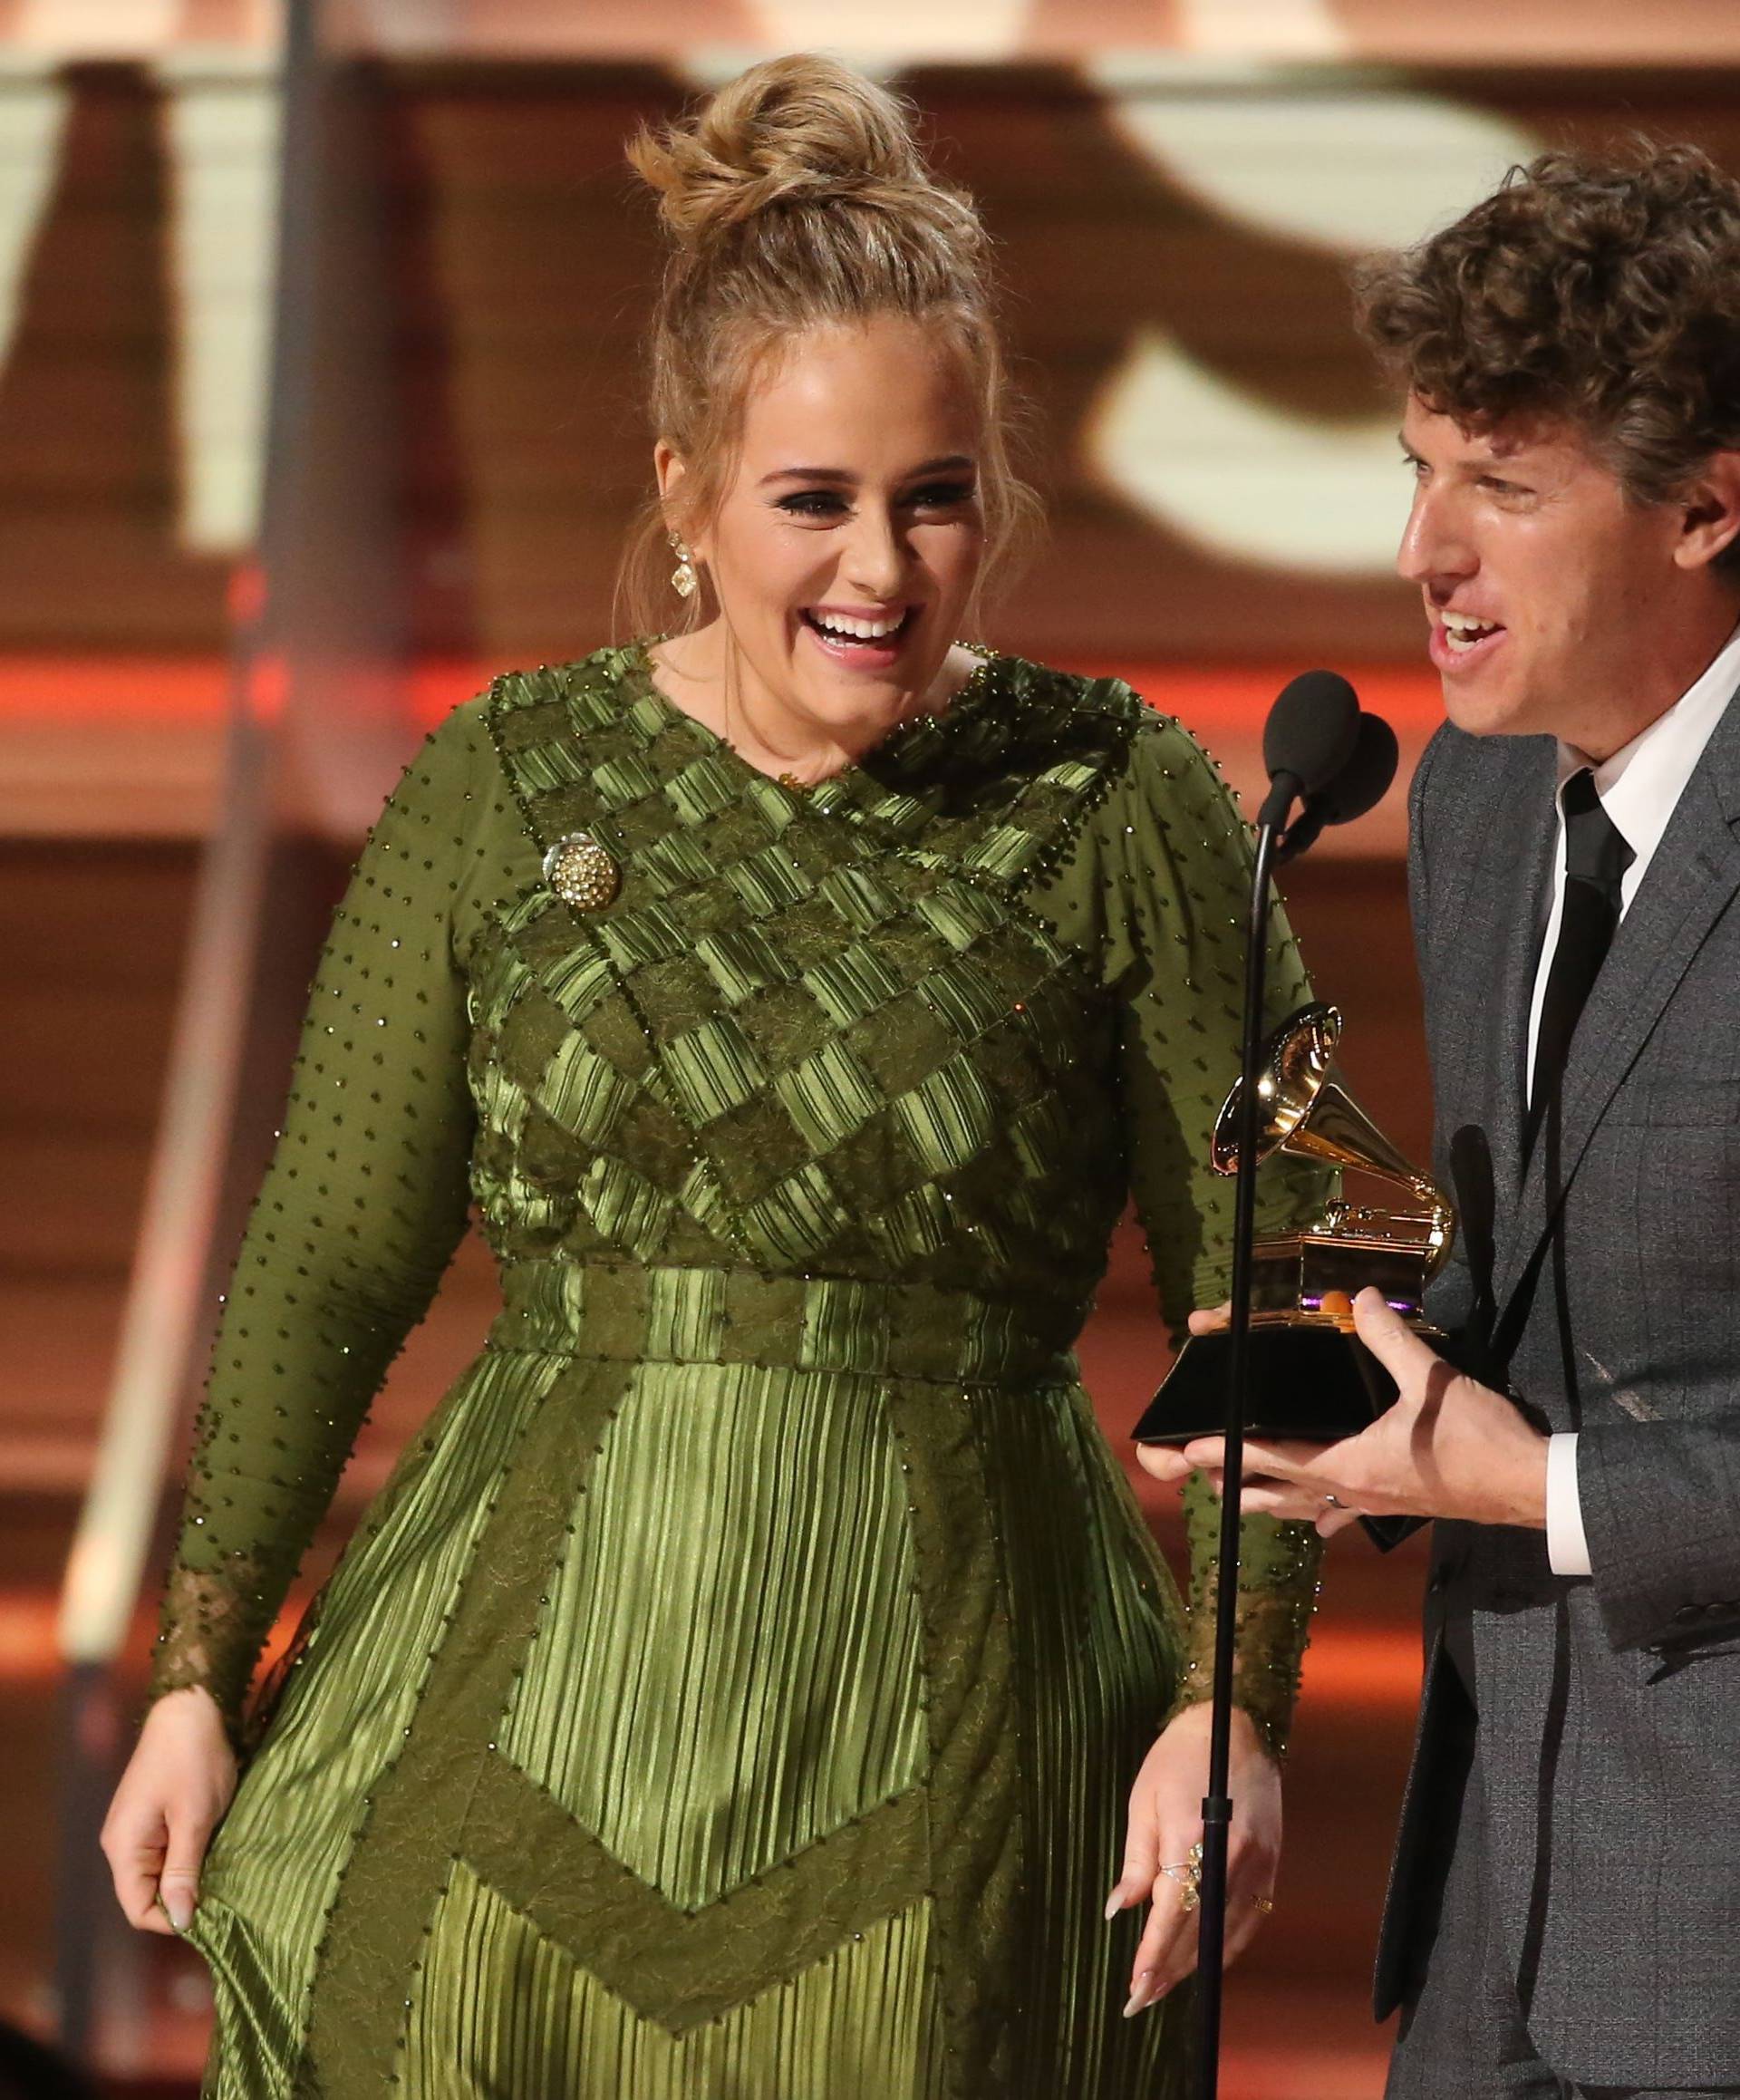 Adele and co writer Kurstin accept the Grammy for Song of the Year for "Hello" at the 59th Annual Grammy Awards in Los Angeles